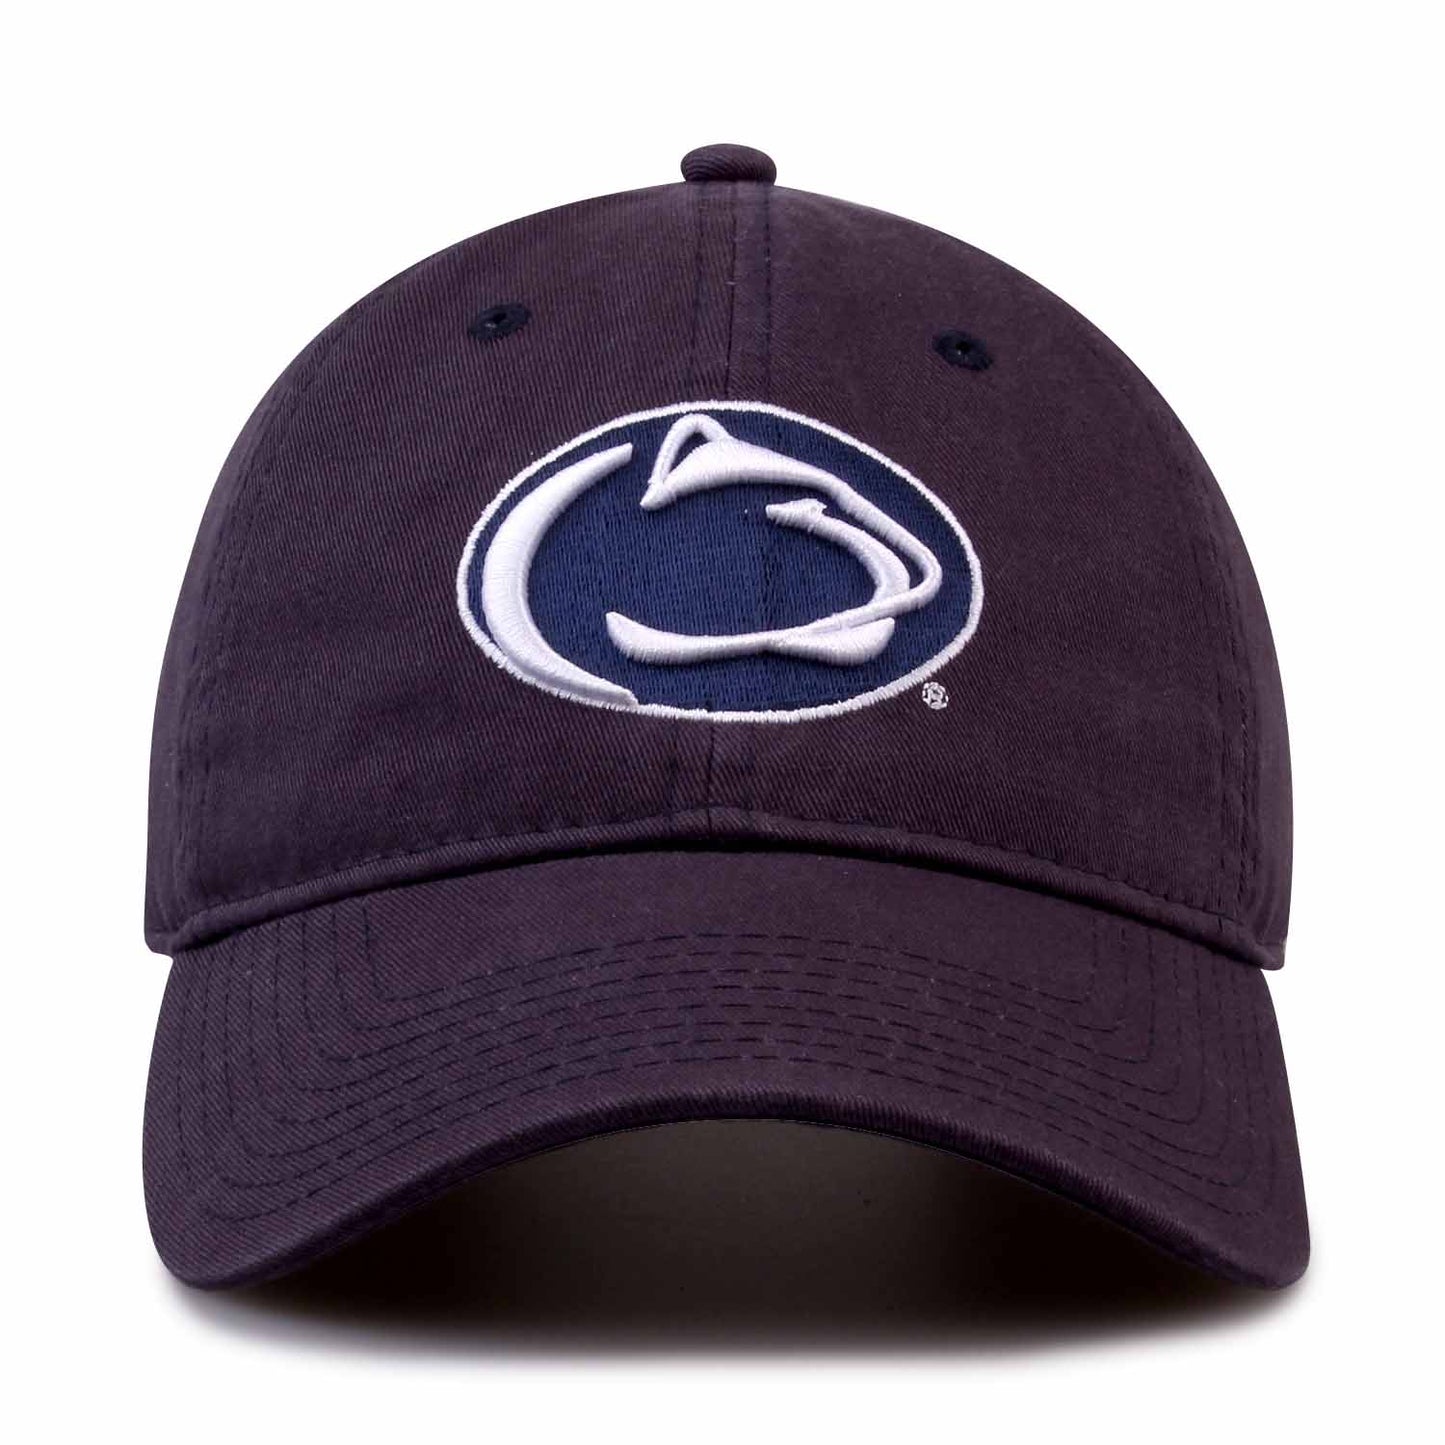 Penn State Nittany Lions NCAA Adult Relaxed Fit Logo Hat - Navy